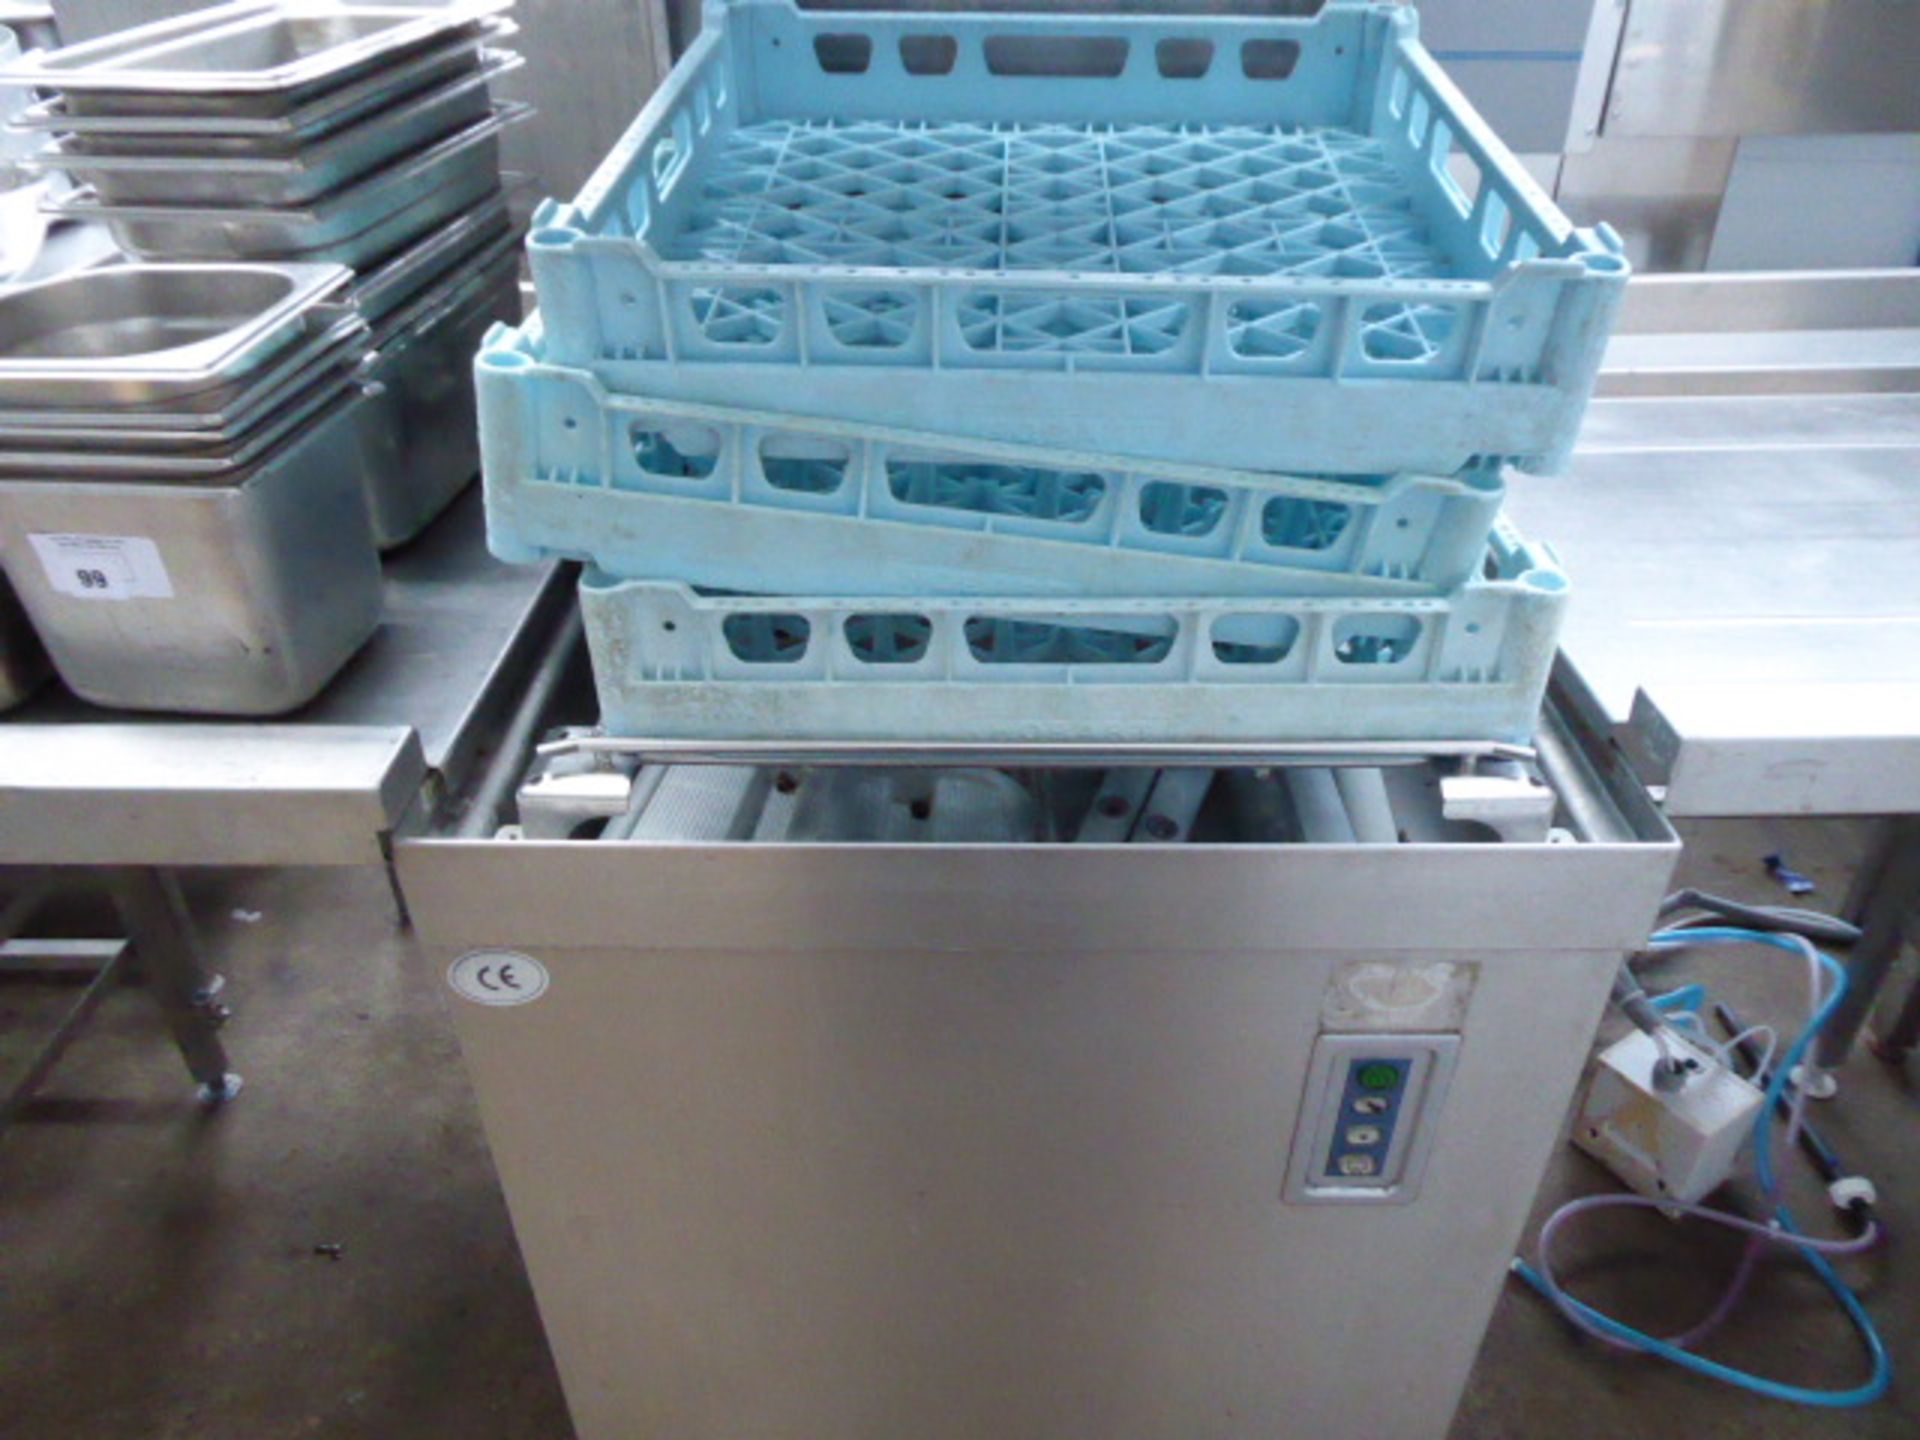 62cm Winterhalter GS501 lift top pass through dishwasher with associated draining boards - Image 3 of 3